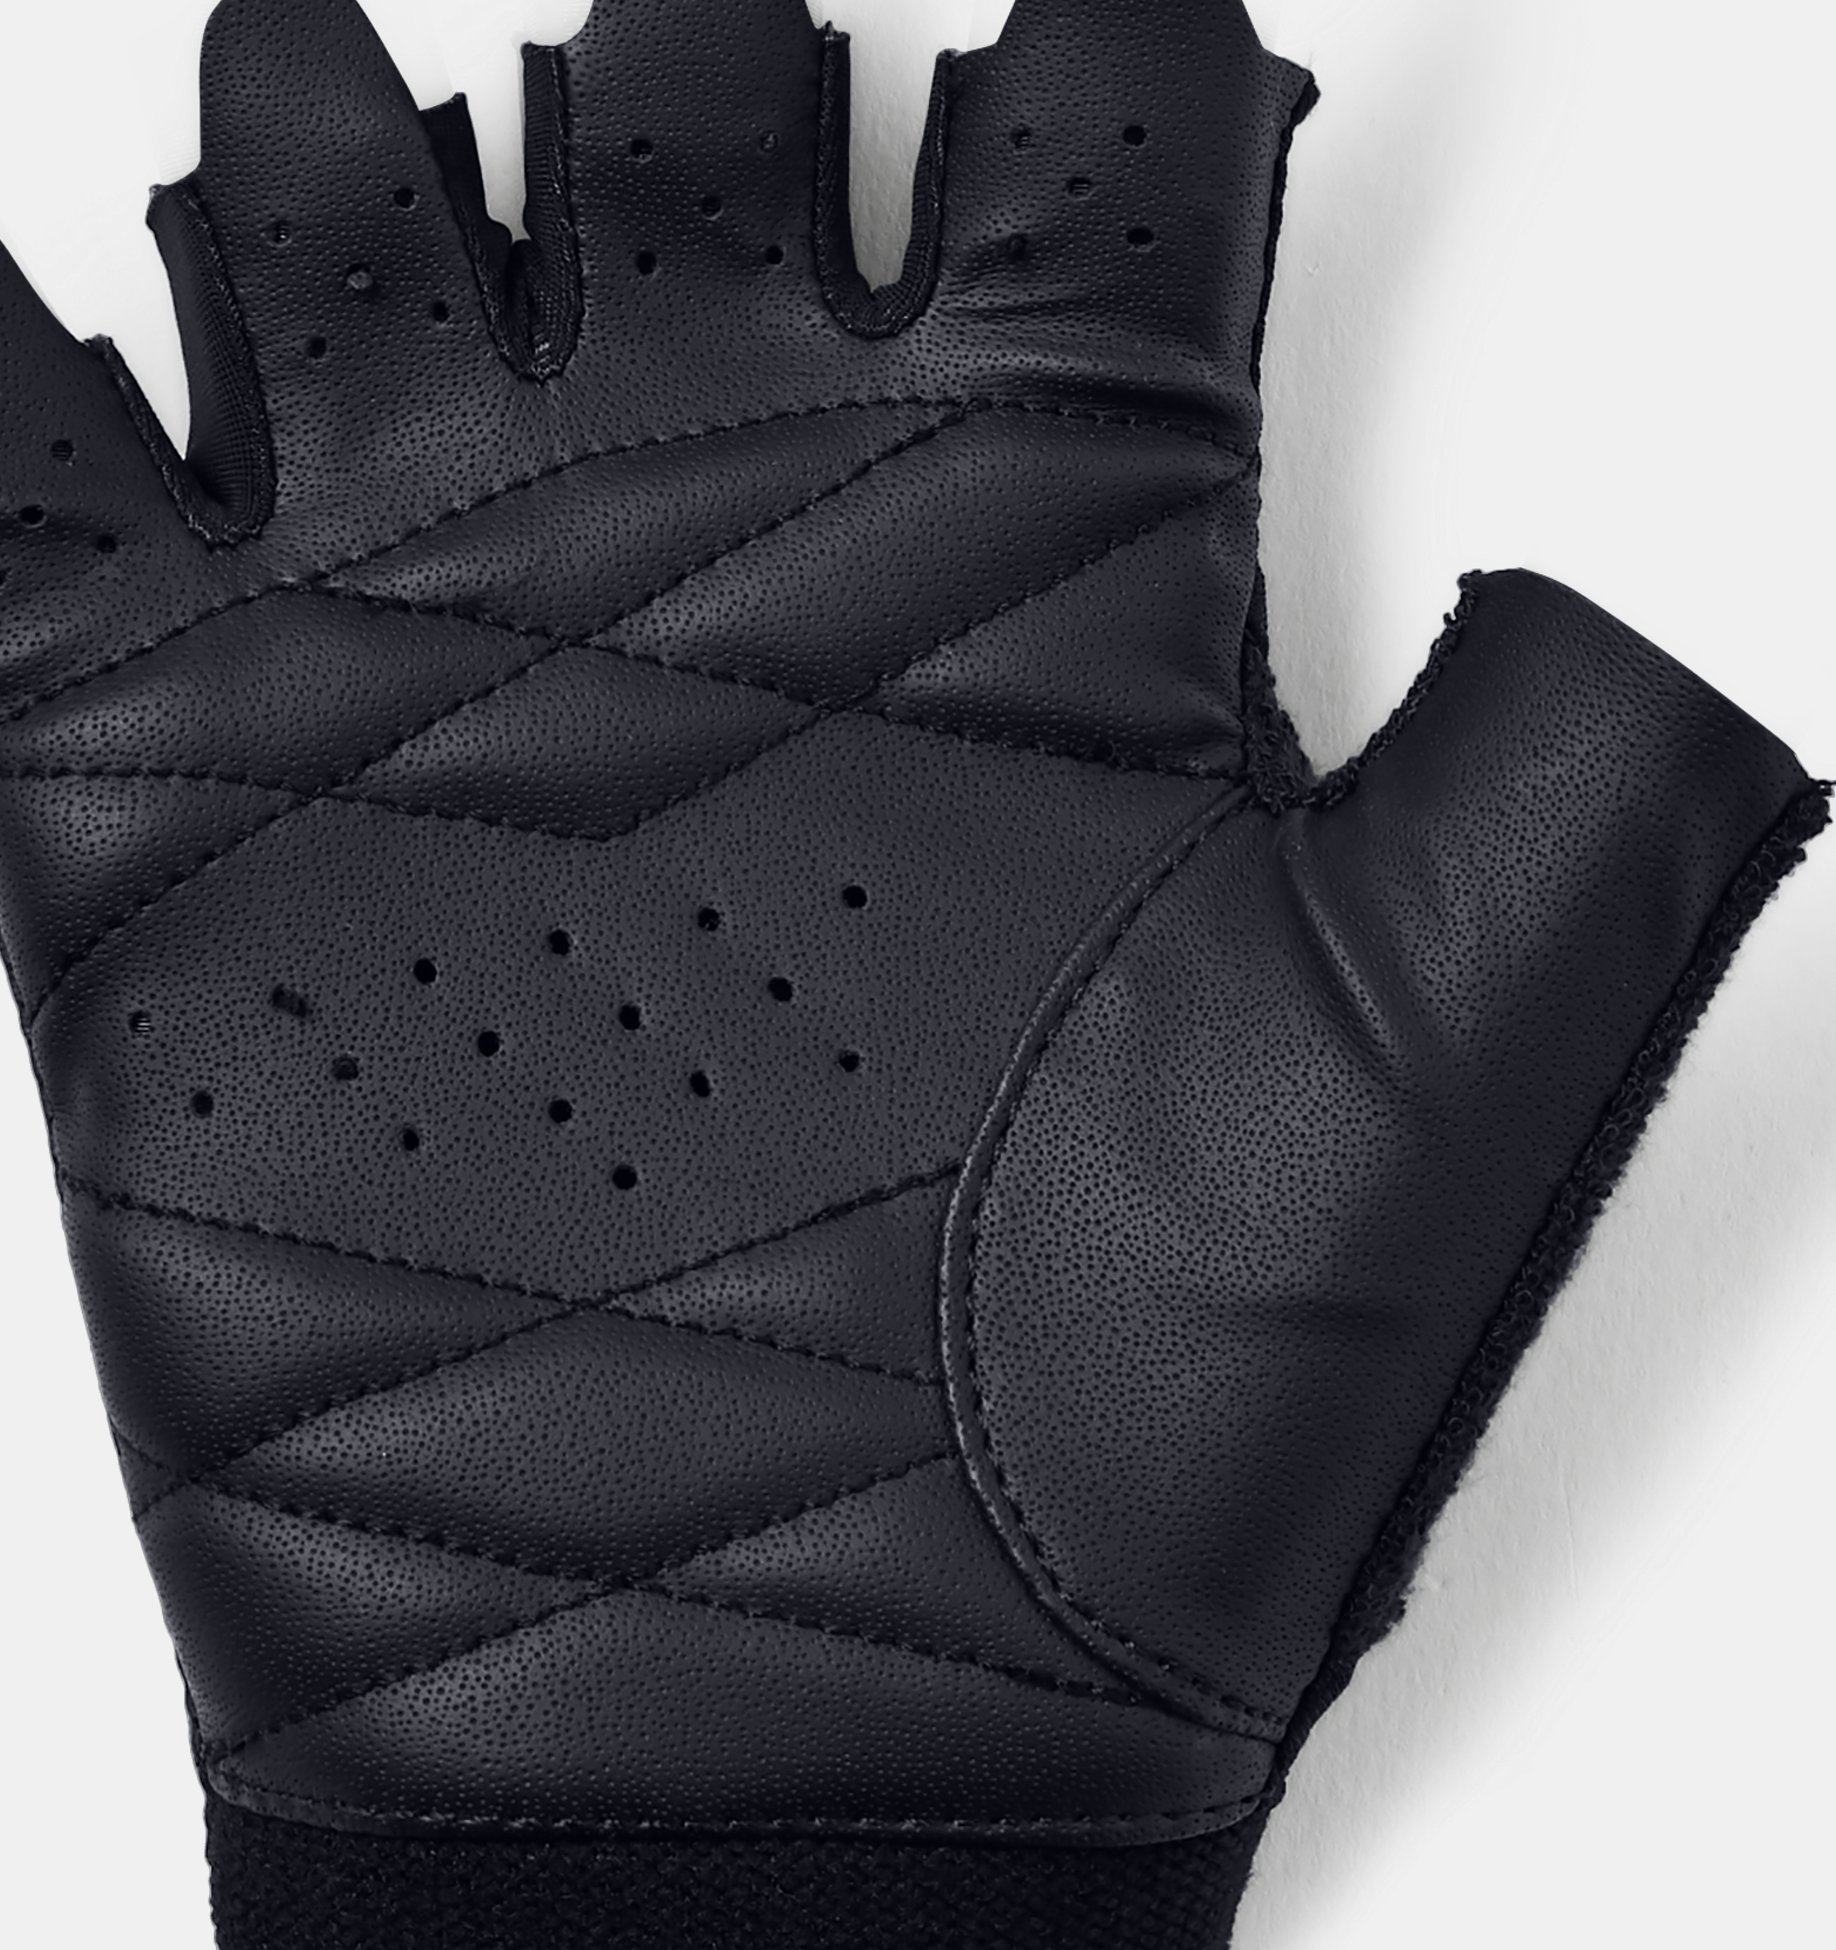 https://underarmour.scene7.com/is/image/Underarmour/1329326-001_SLB_SL?rp=standard-0pad|pdpZoomDesktop&scl=0.85&fmt=jpg&qlt=85&resMode=sharp2&cache=on,on&bgc=f0f0f0&wid=1836&hei=1950&size=1500,1500